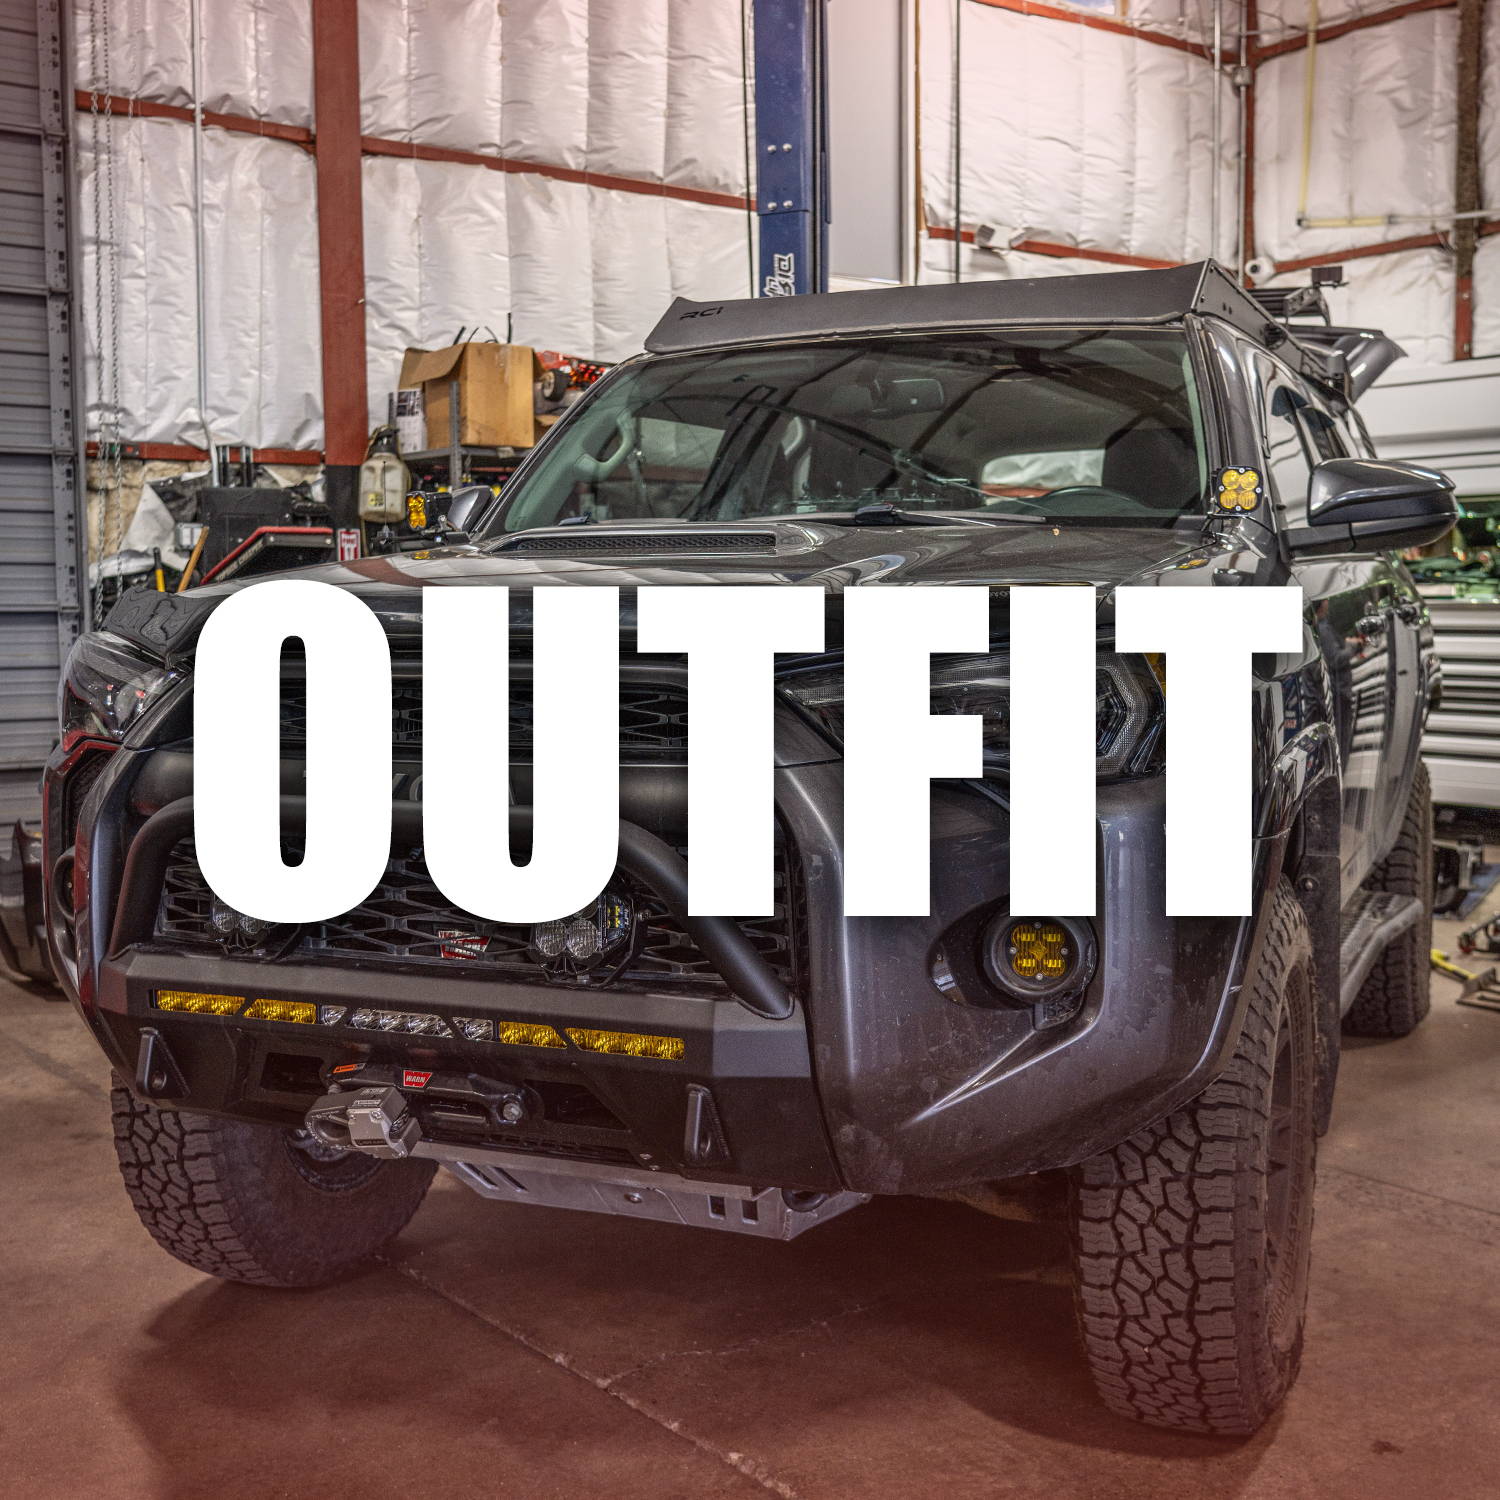 Summit 4x4 Company performs installation of off-road accessories